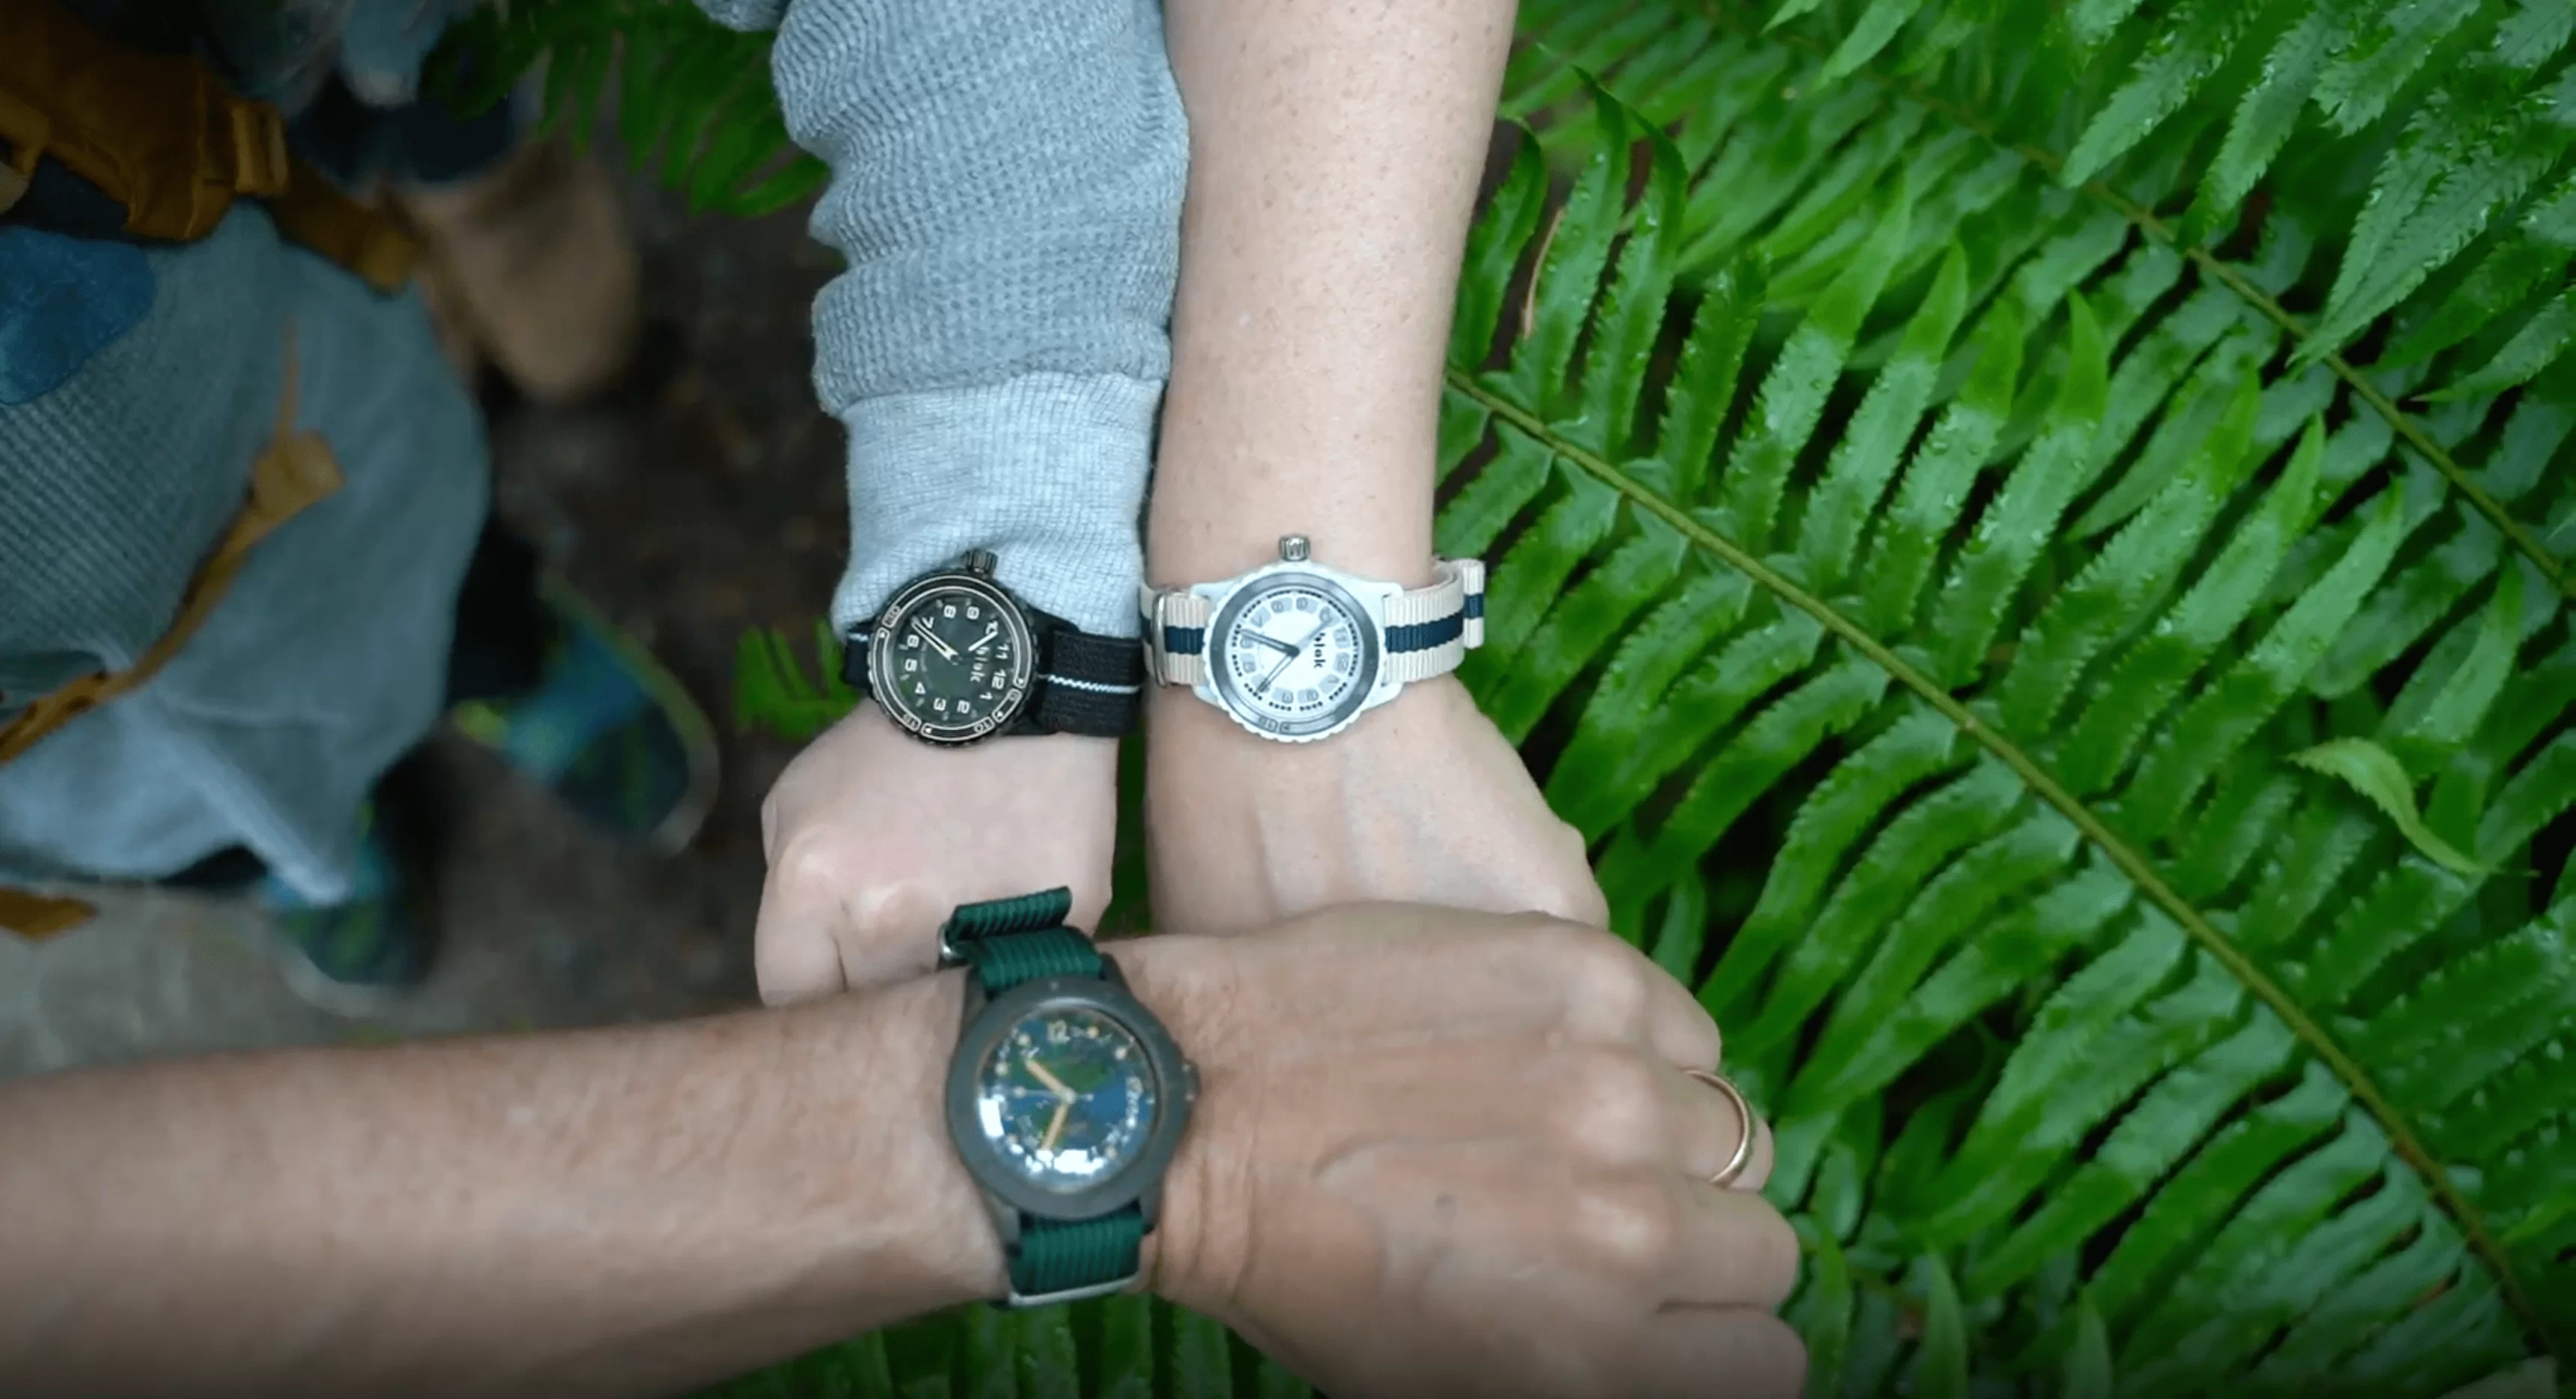 Family Wrist shot during production (on top of a bunch of ferns in the forest)